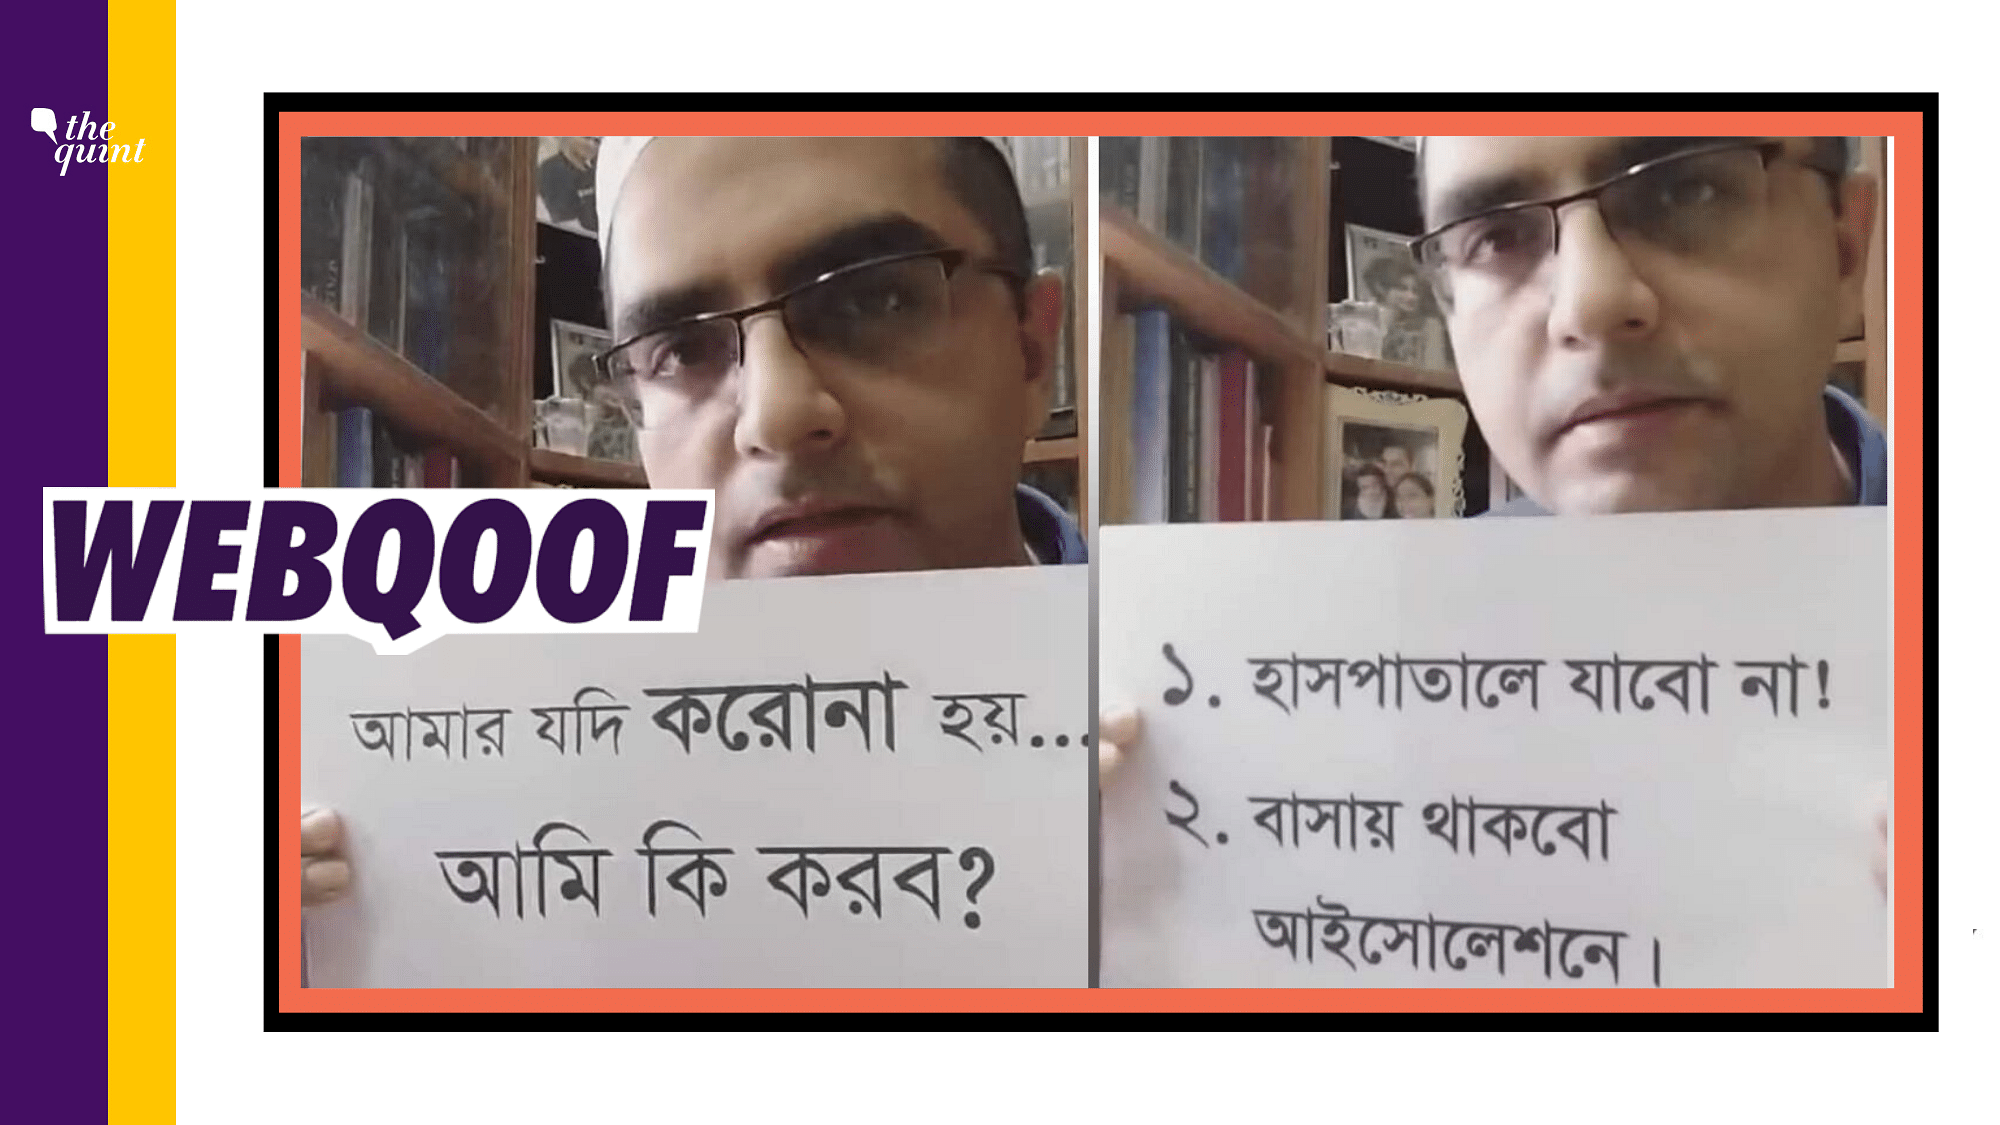 The viral post in Bengali, says it is a doctor’s advice. His first card says, “If I get corona, what will I do?”